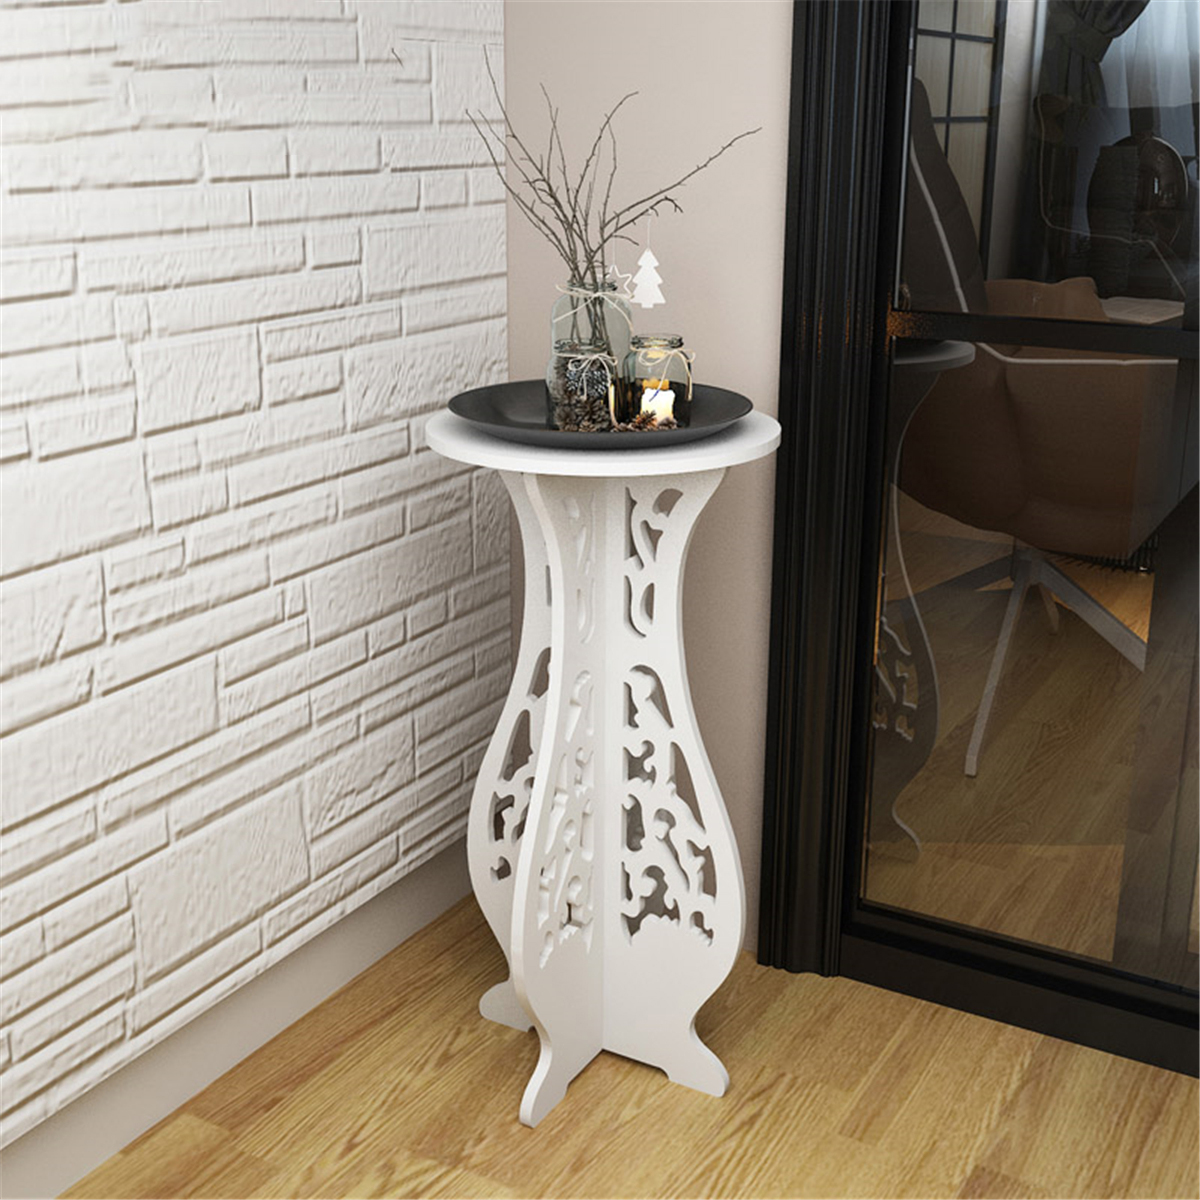 Find Garfans Floor standing Simple Balcony Flower Stand European Style Indoor Outdoor Flower Pot Stand Bedroom Living Room Decoration Flower Stand for Sale on Gipsybee.com with cryptocurrencies